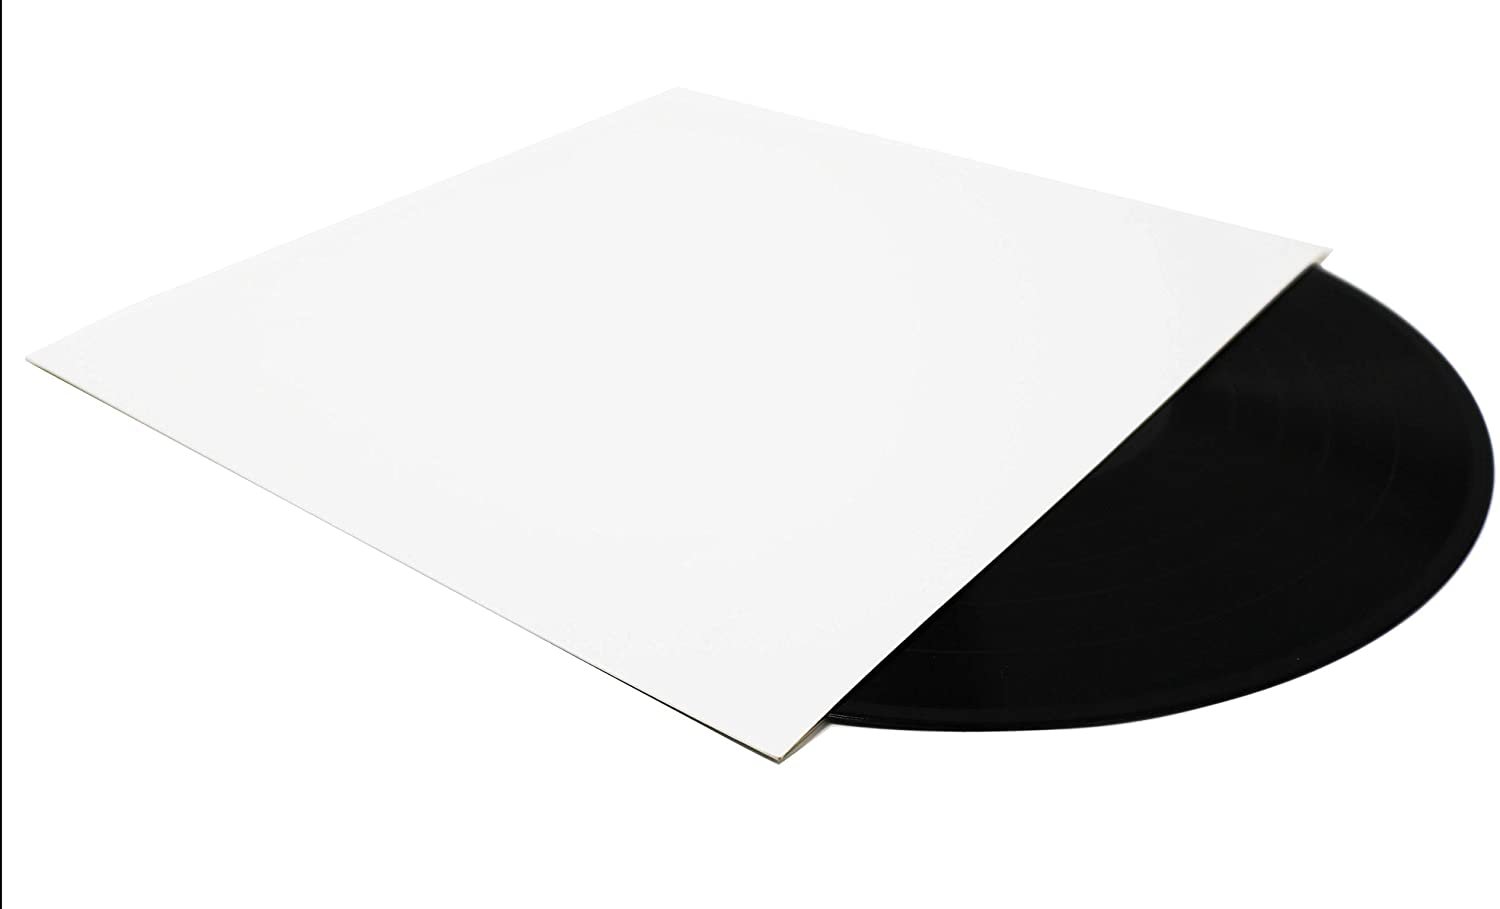 Record Jackets | Blank Vinyl Album Jackets for 20x12 LPs